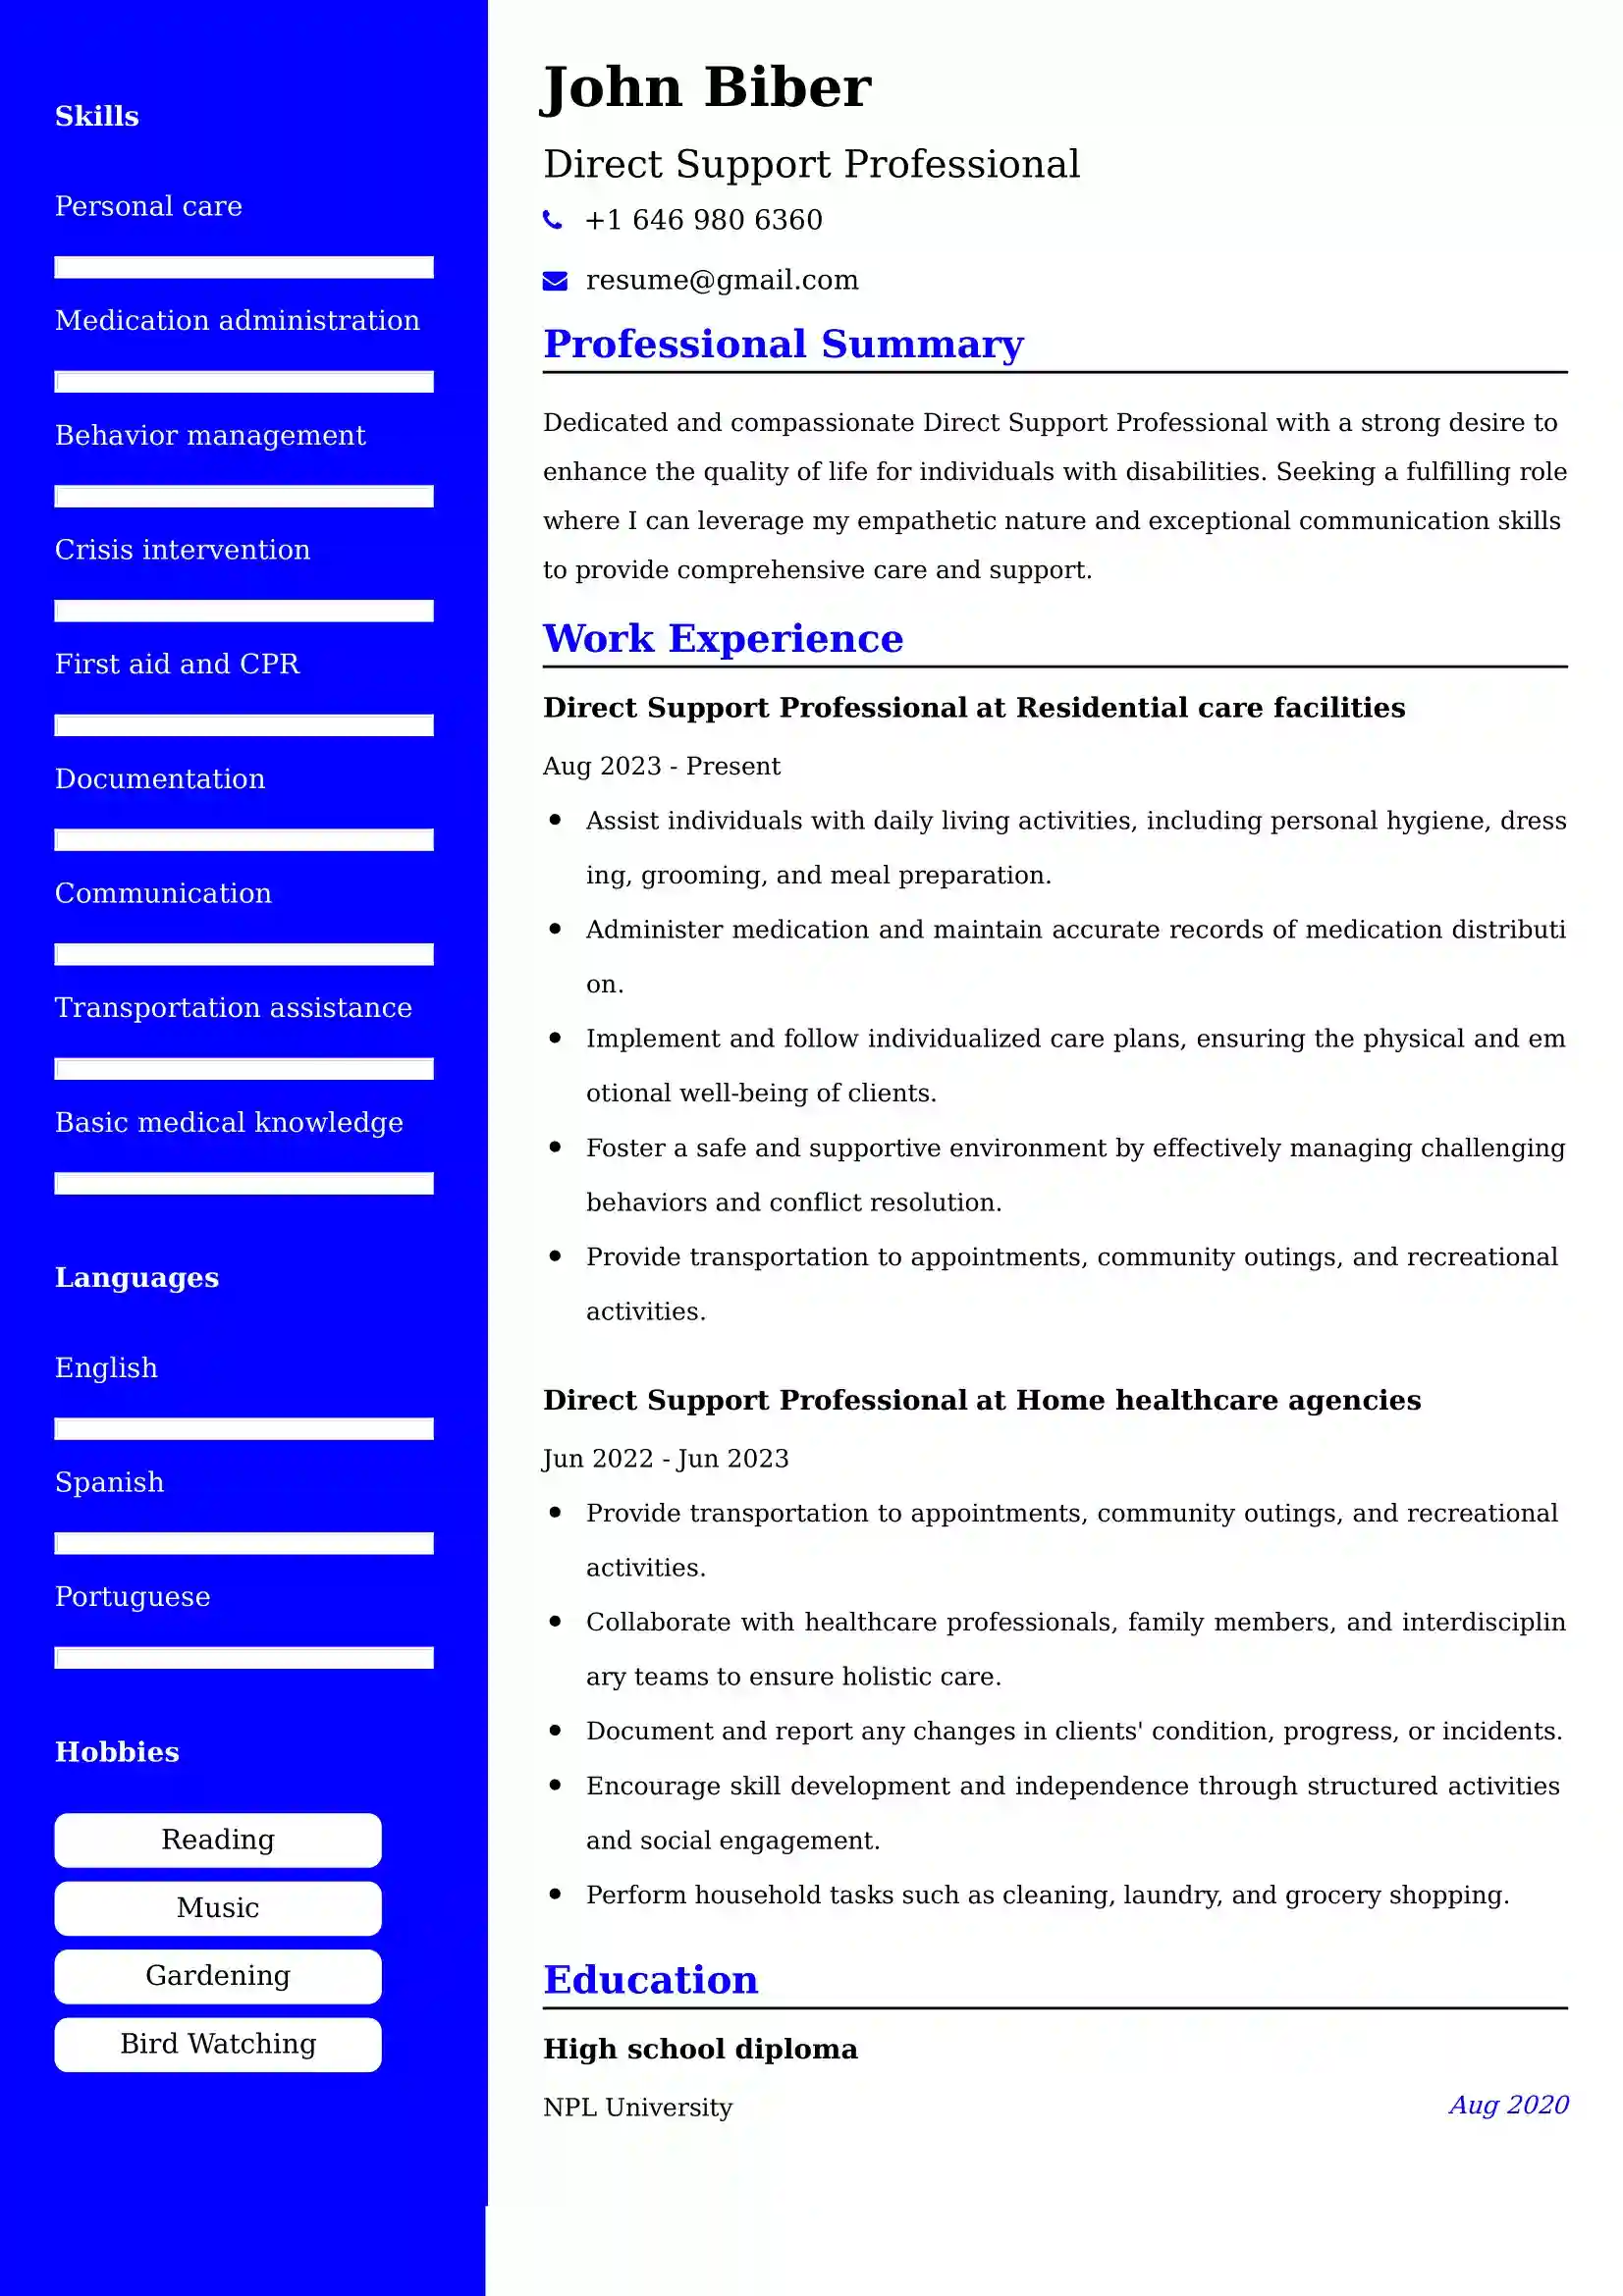 Direct Support Professional Resume Examples for UK Jobs - Tips and Guide